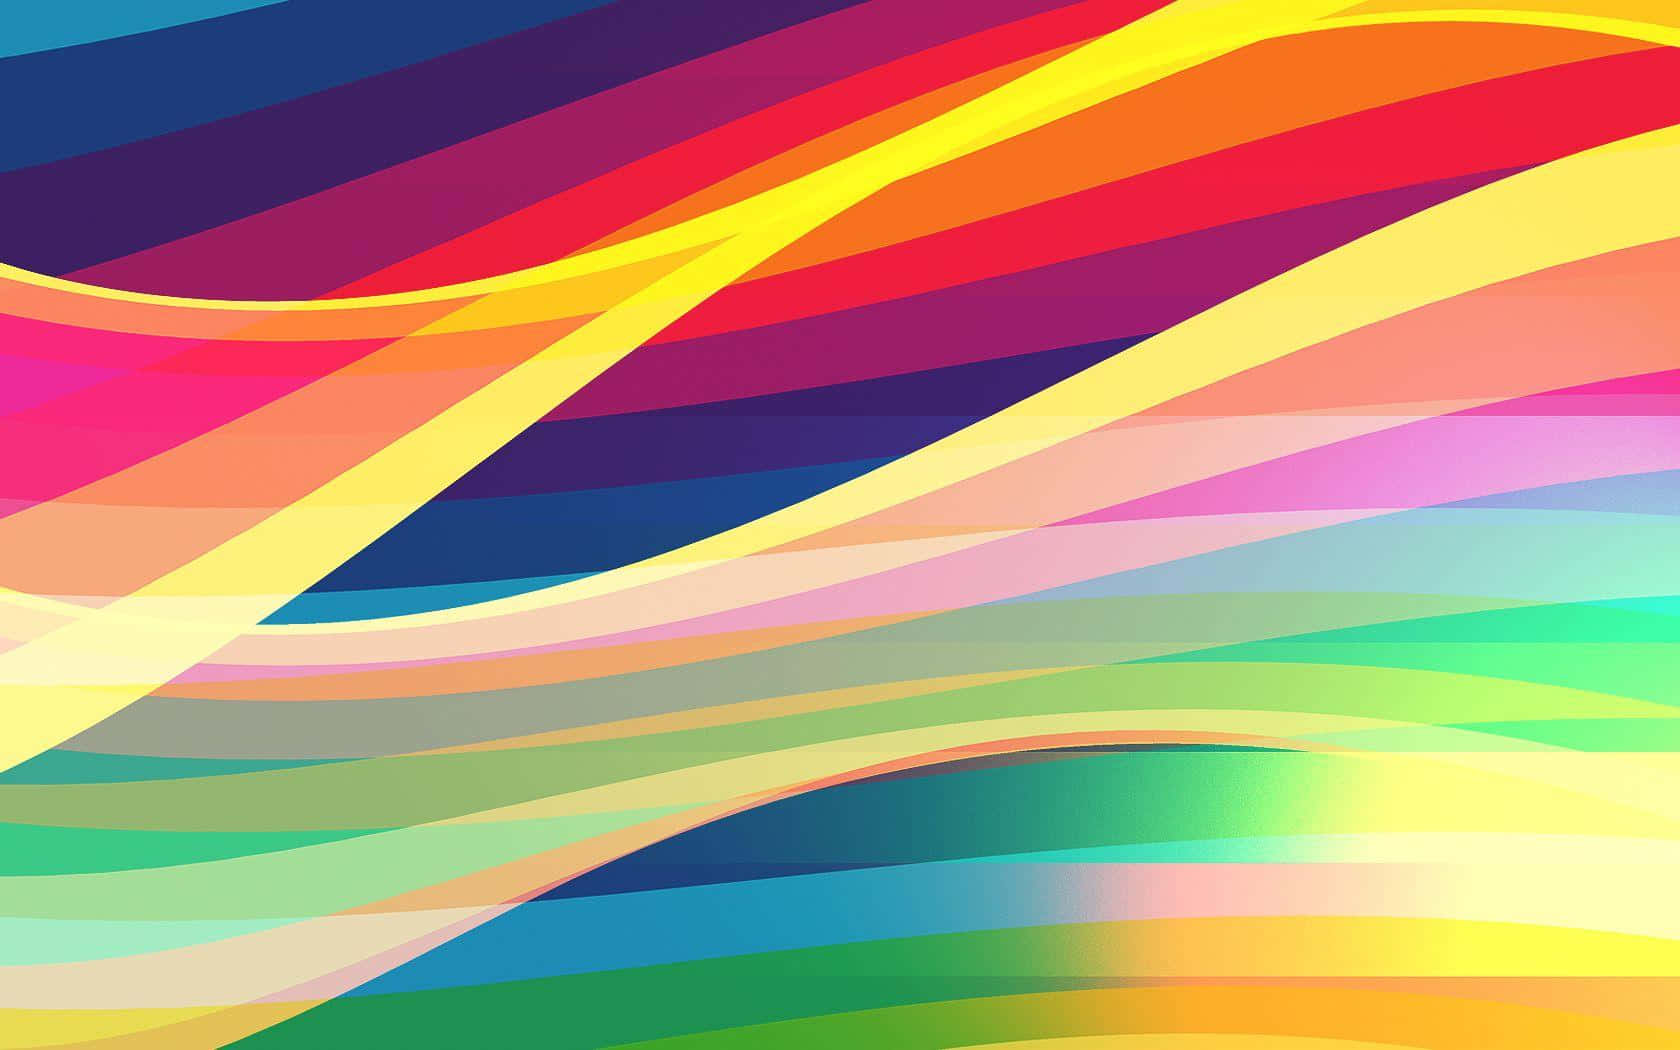 A Colorful Abstract Background With A Rainbow Wave